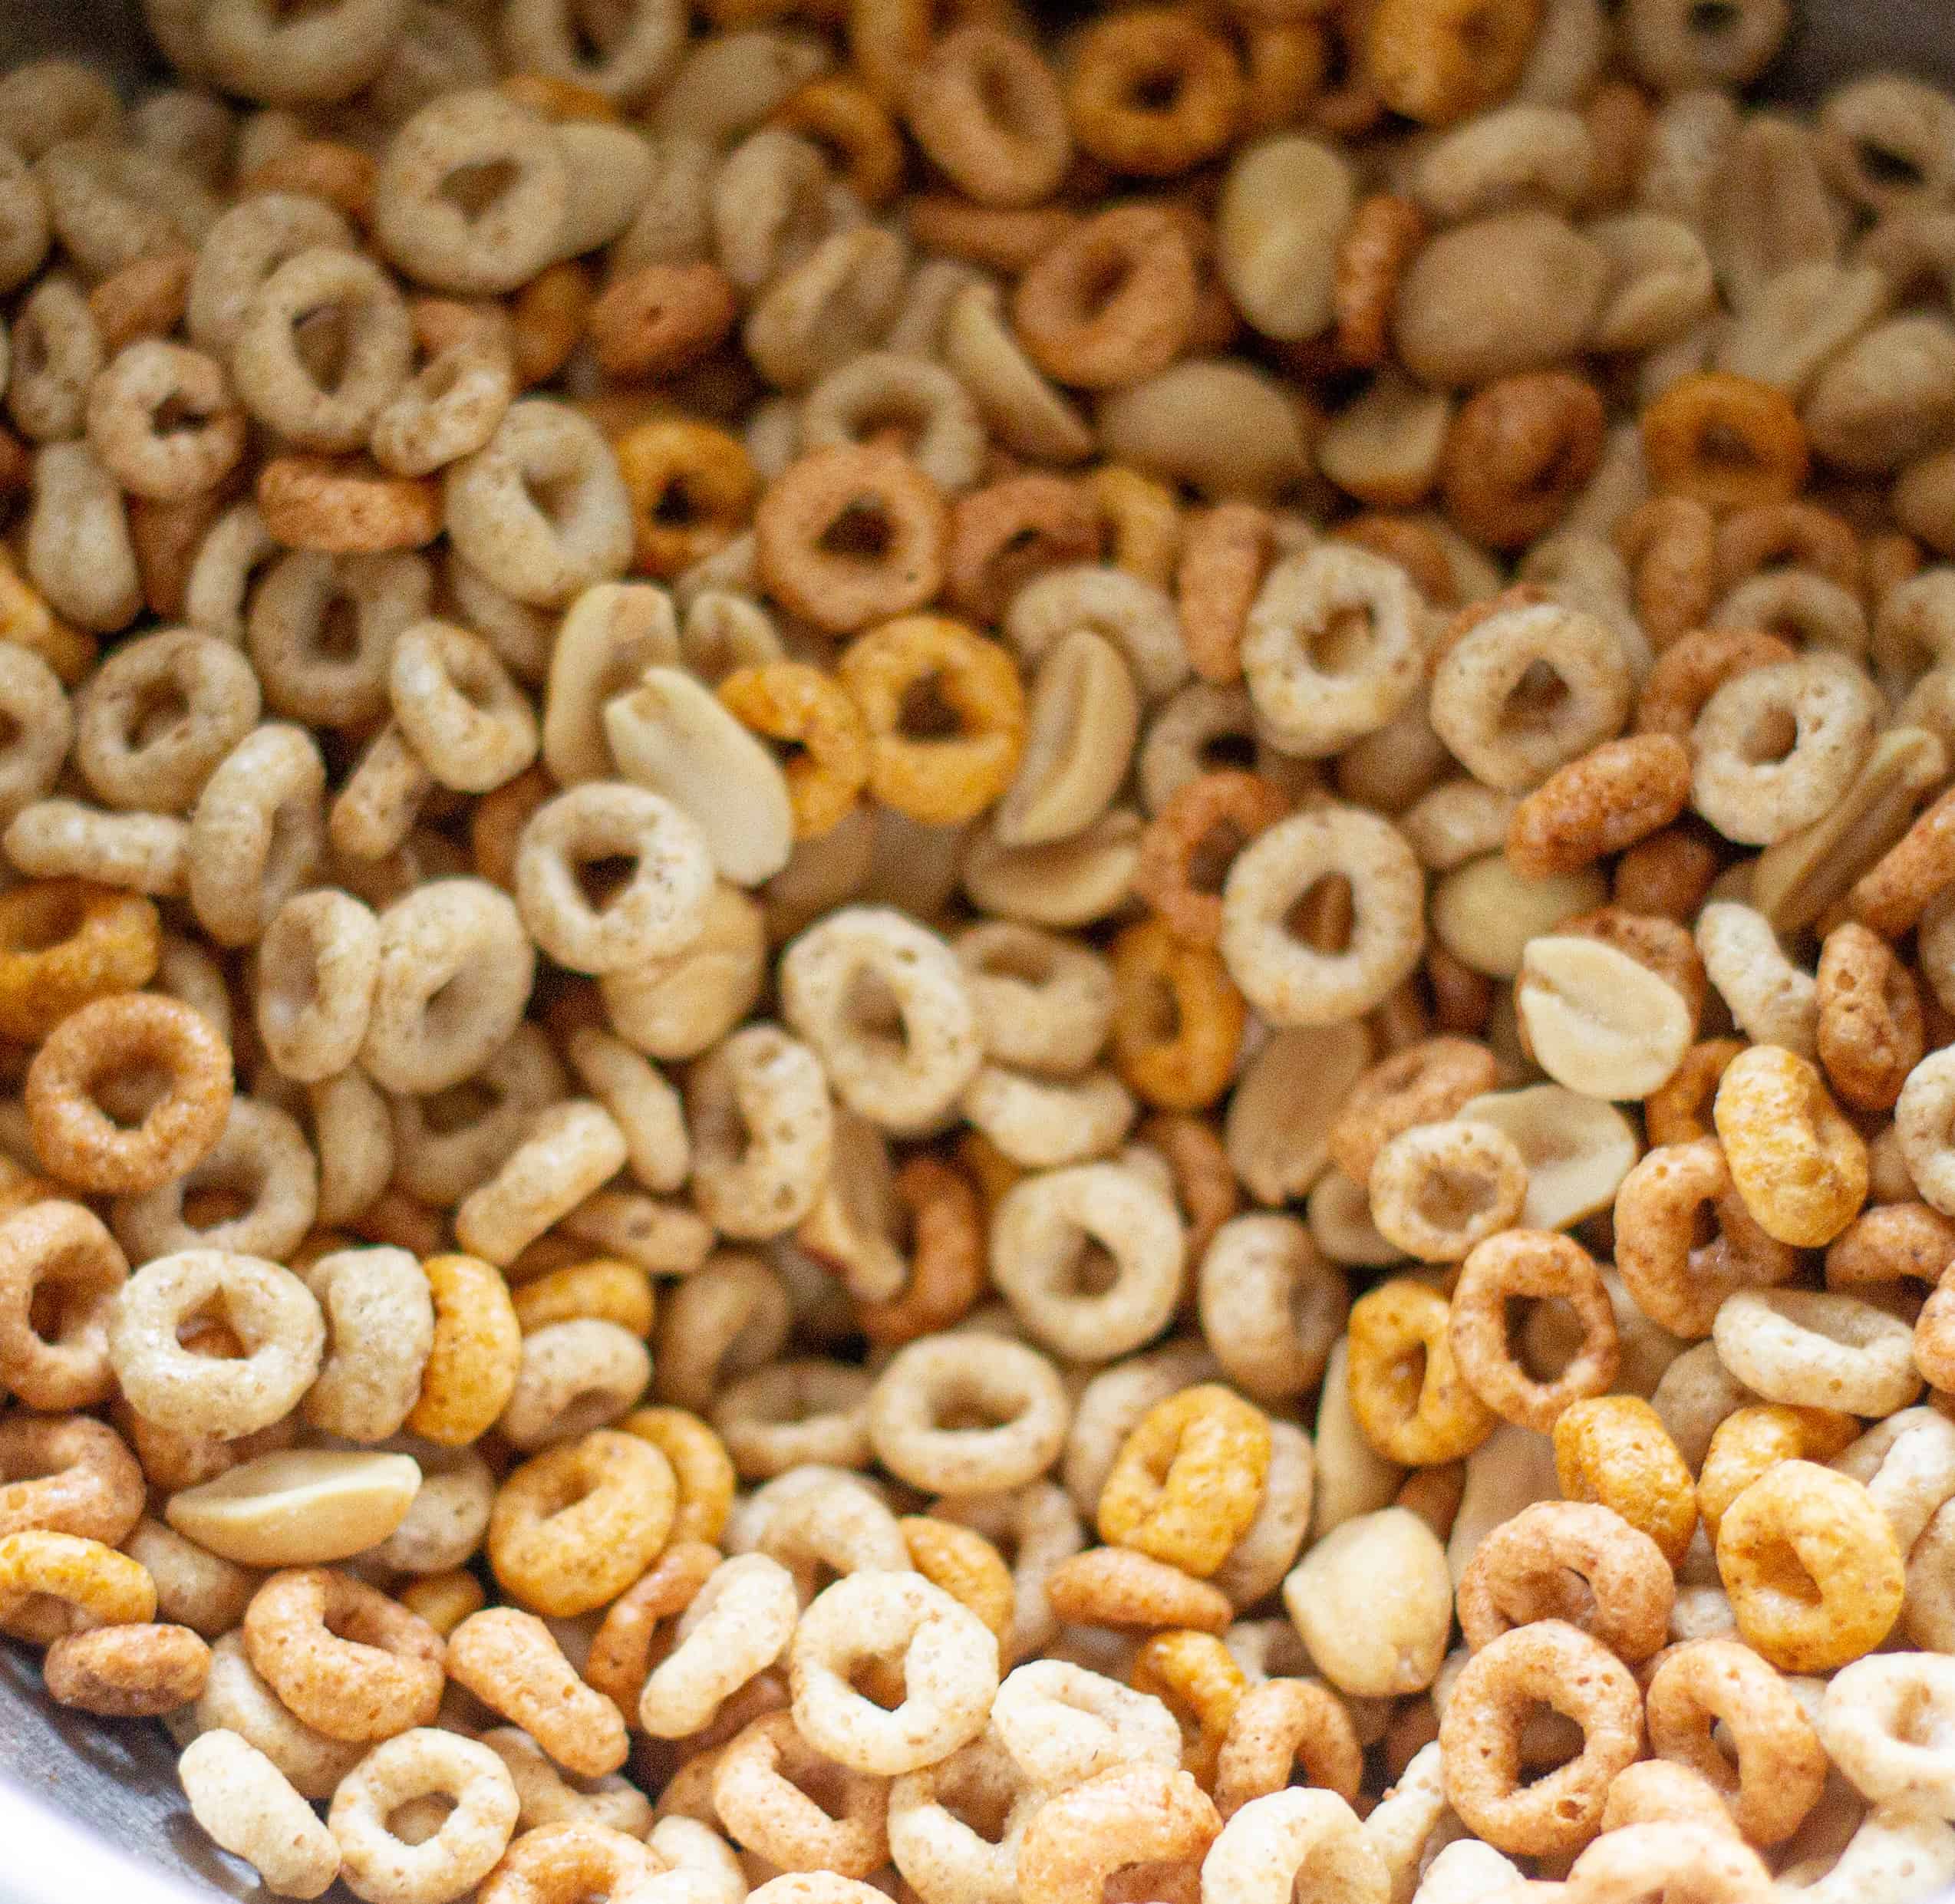 Cheerios and peanuts mixed in a bowl